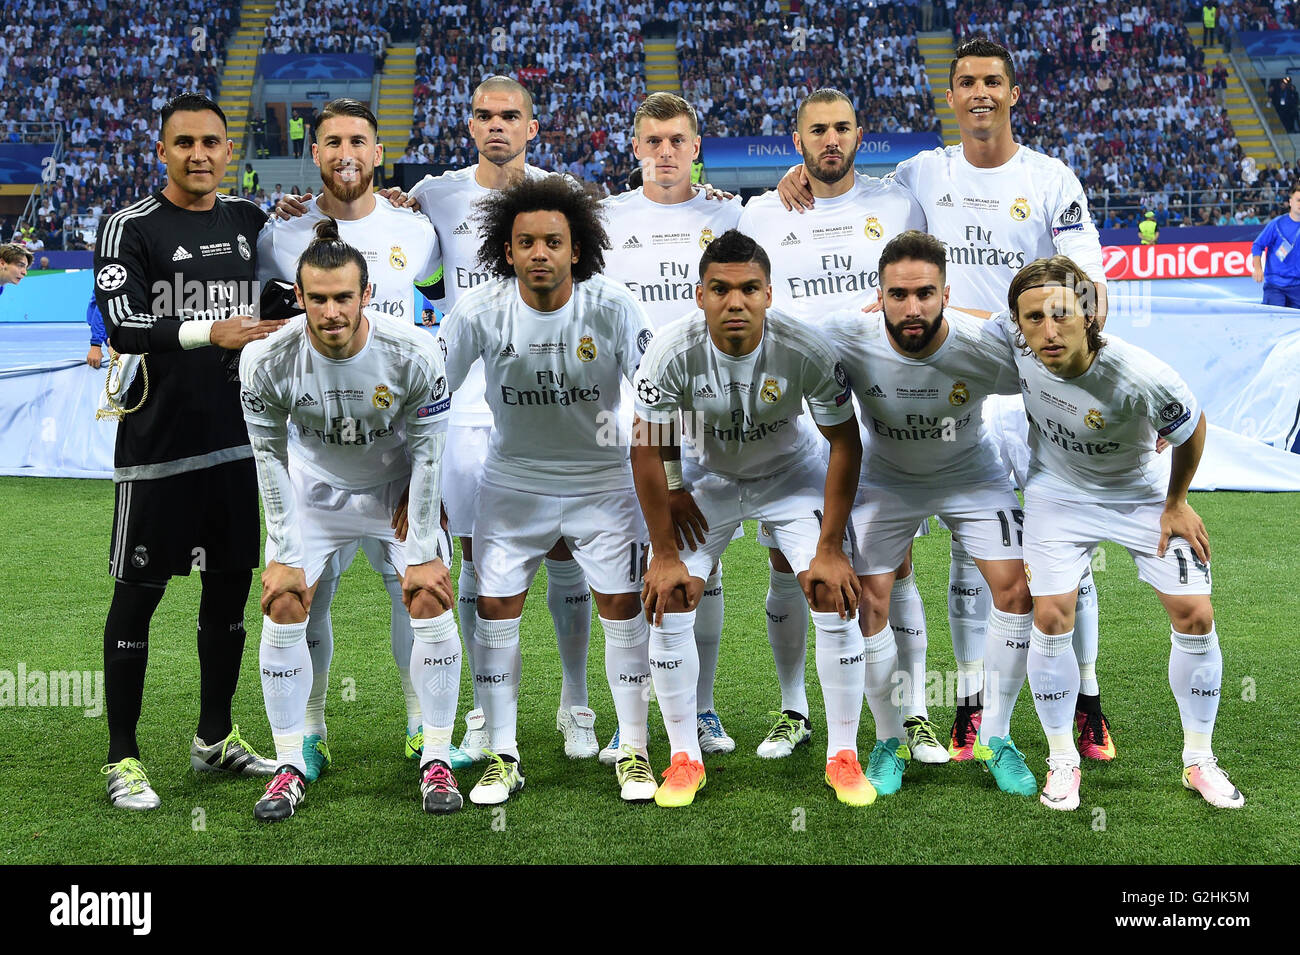 Milan, Italy. 28th May, 2016. Real Madrid team group line up Football/Soccer : UEFA Champions League final match between Real Madrid 1(5-3)1 Atletico de Madrid at Stadio Giuseppe San Siro in